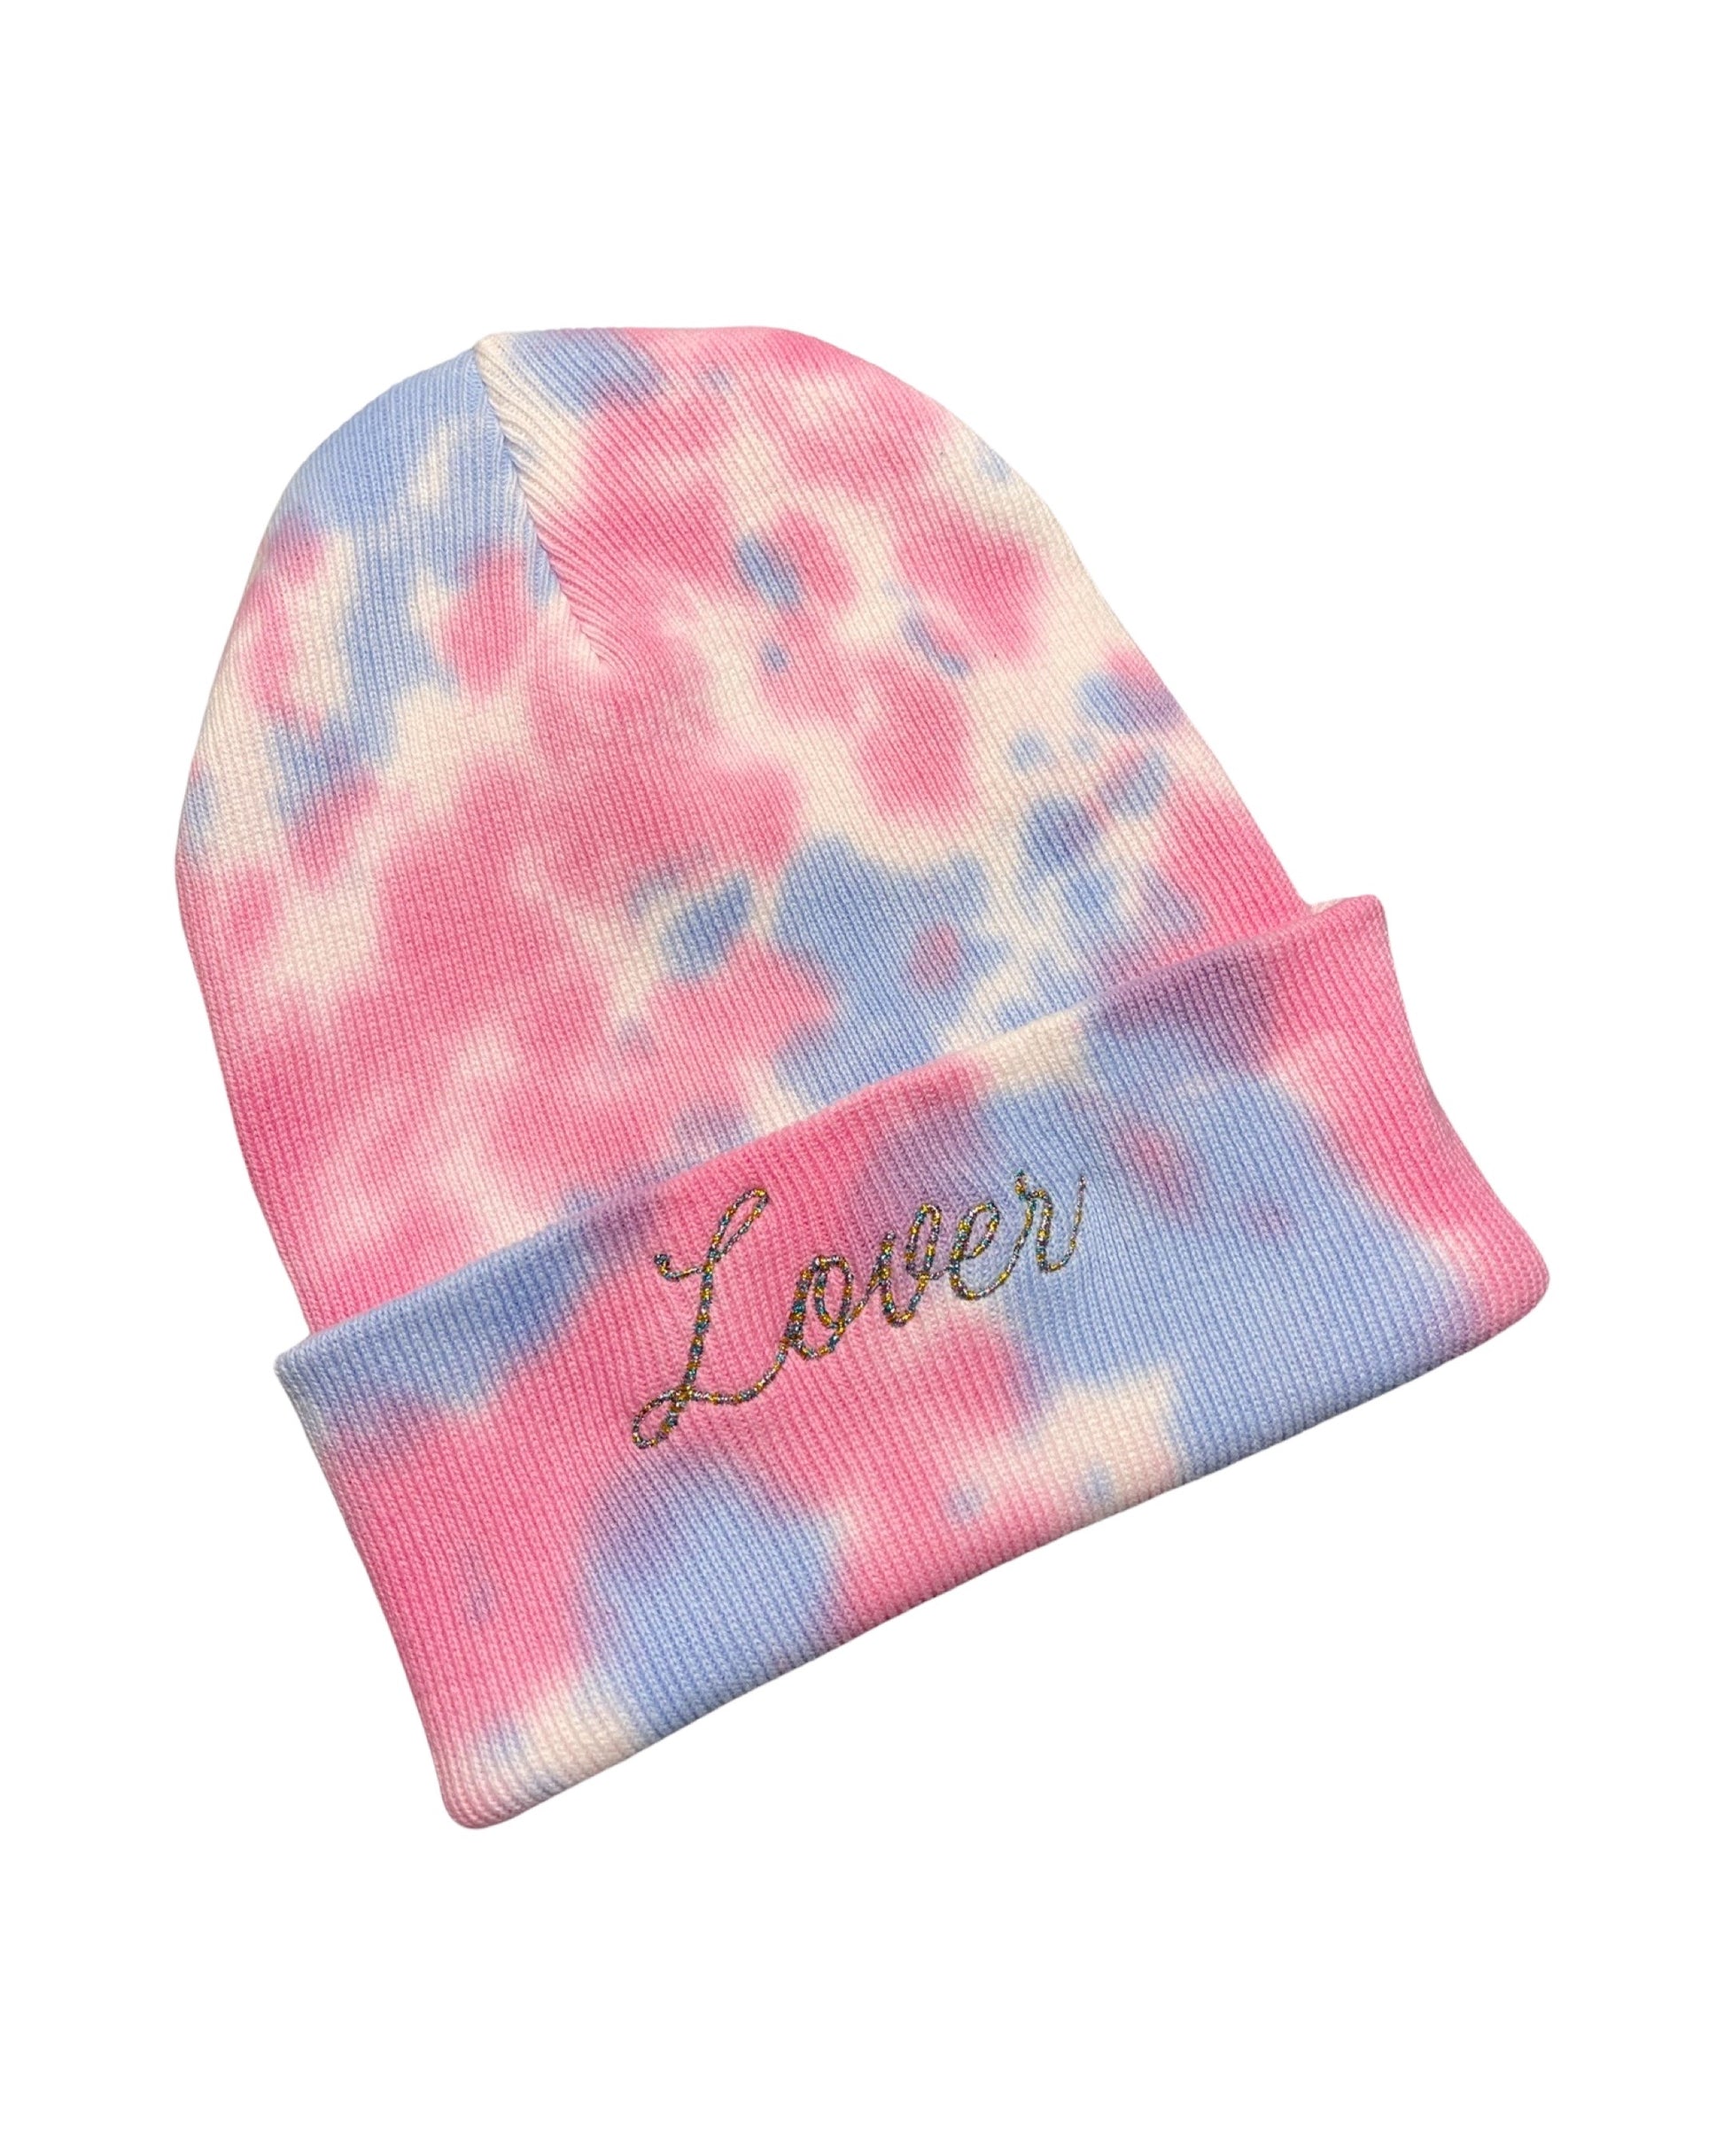 pink and blue tie dye knit beanie embroidered in variegated metallic thread with "LOVER" like the cover to the Taylor Swift Album of the same name